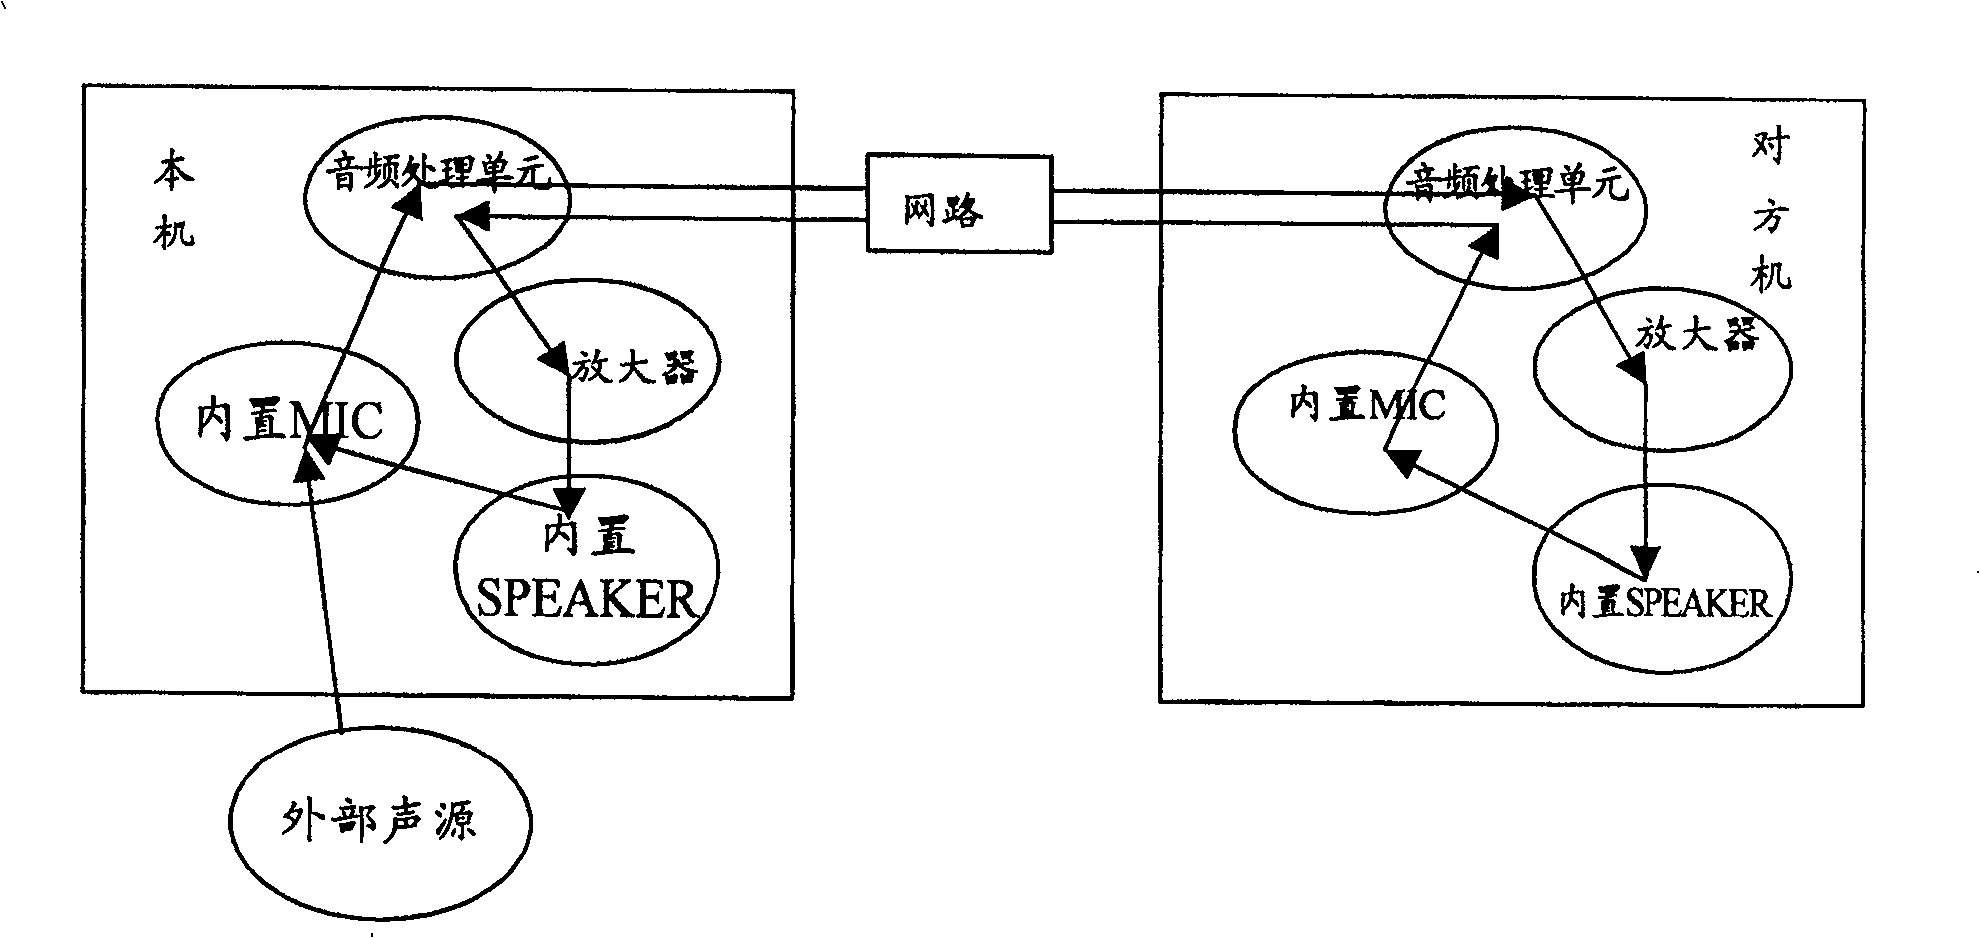 Audio-frequency assembly of computer